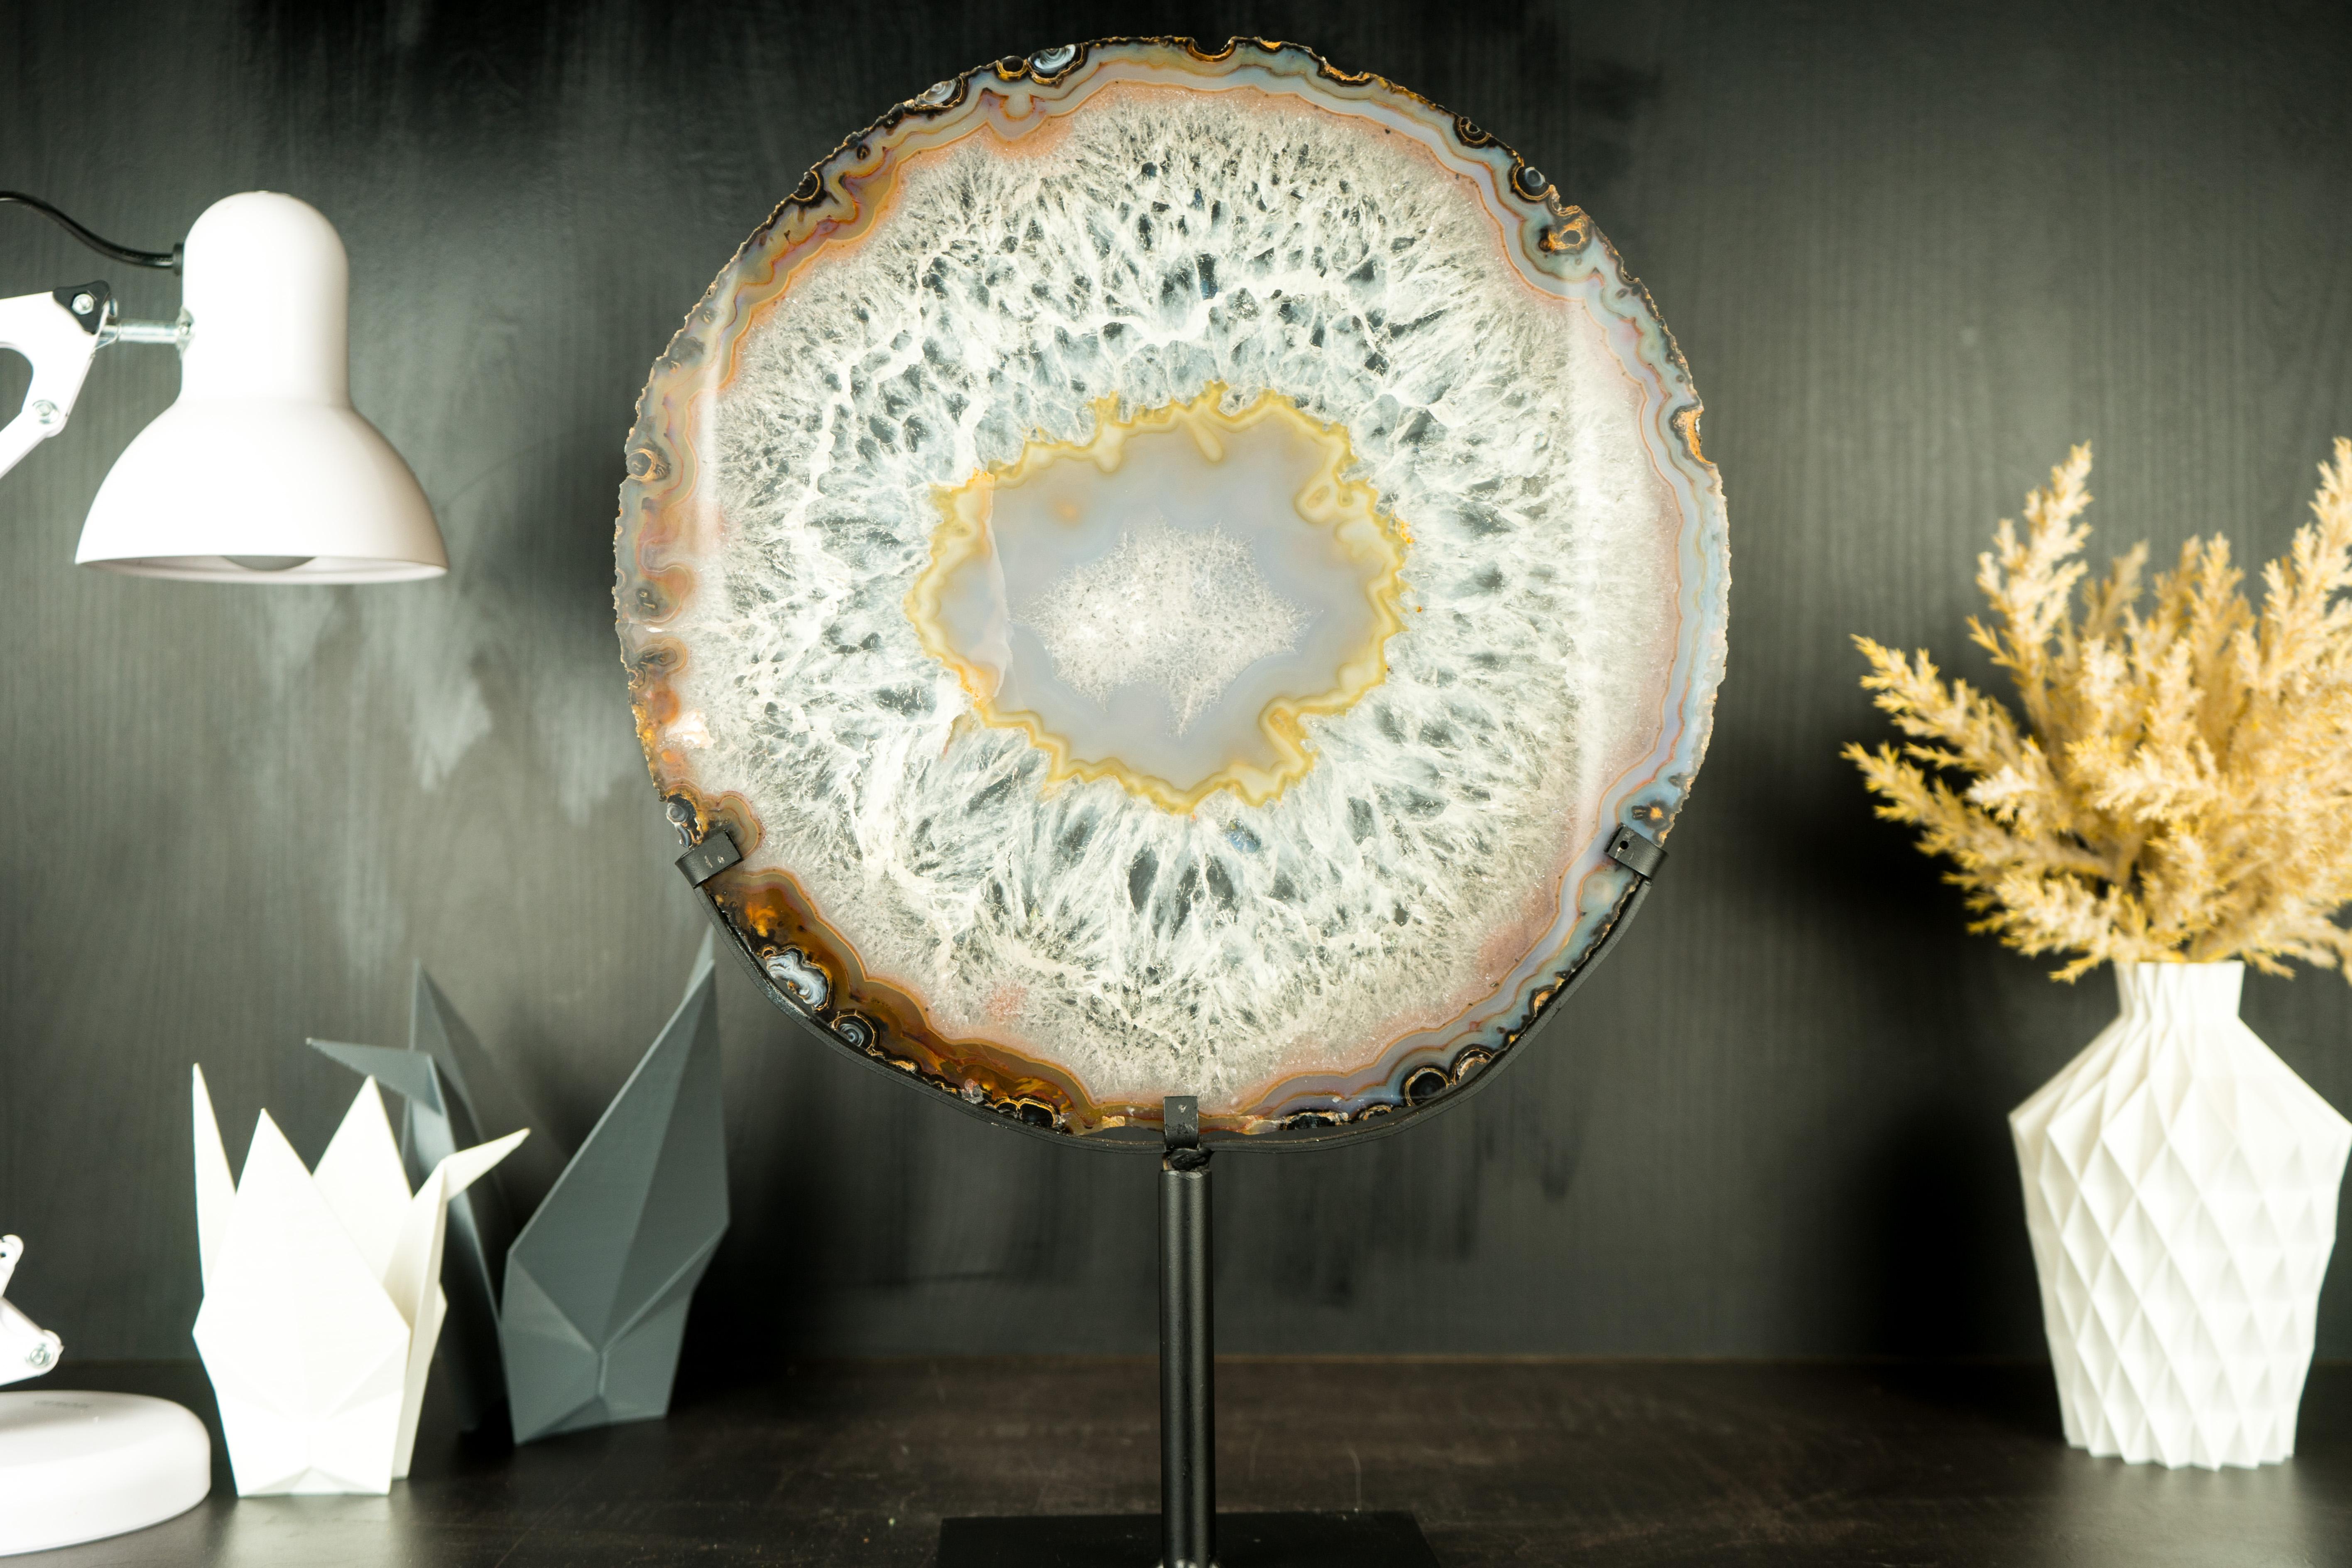 Gallery Grade Large Lace Agate Slice, with Ice-Like Crystal and Colorful Agate 12